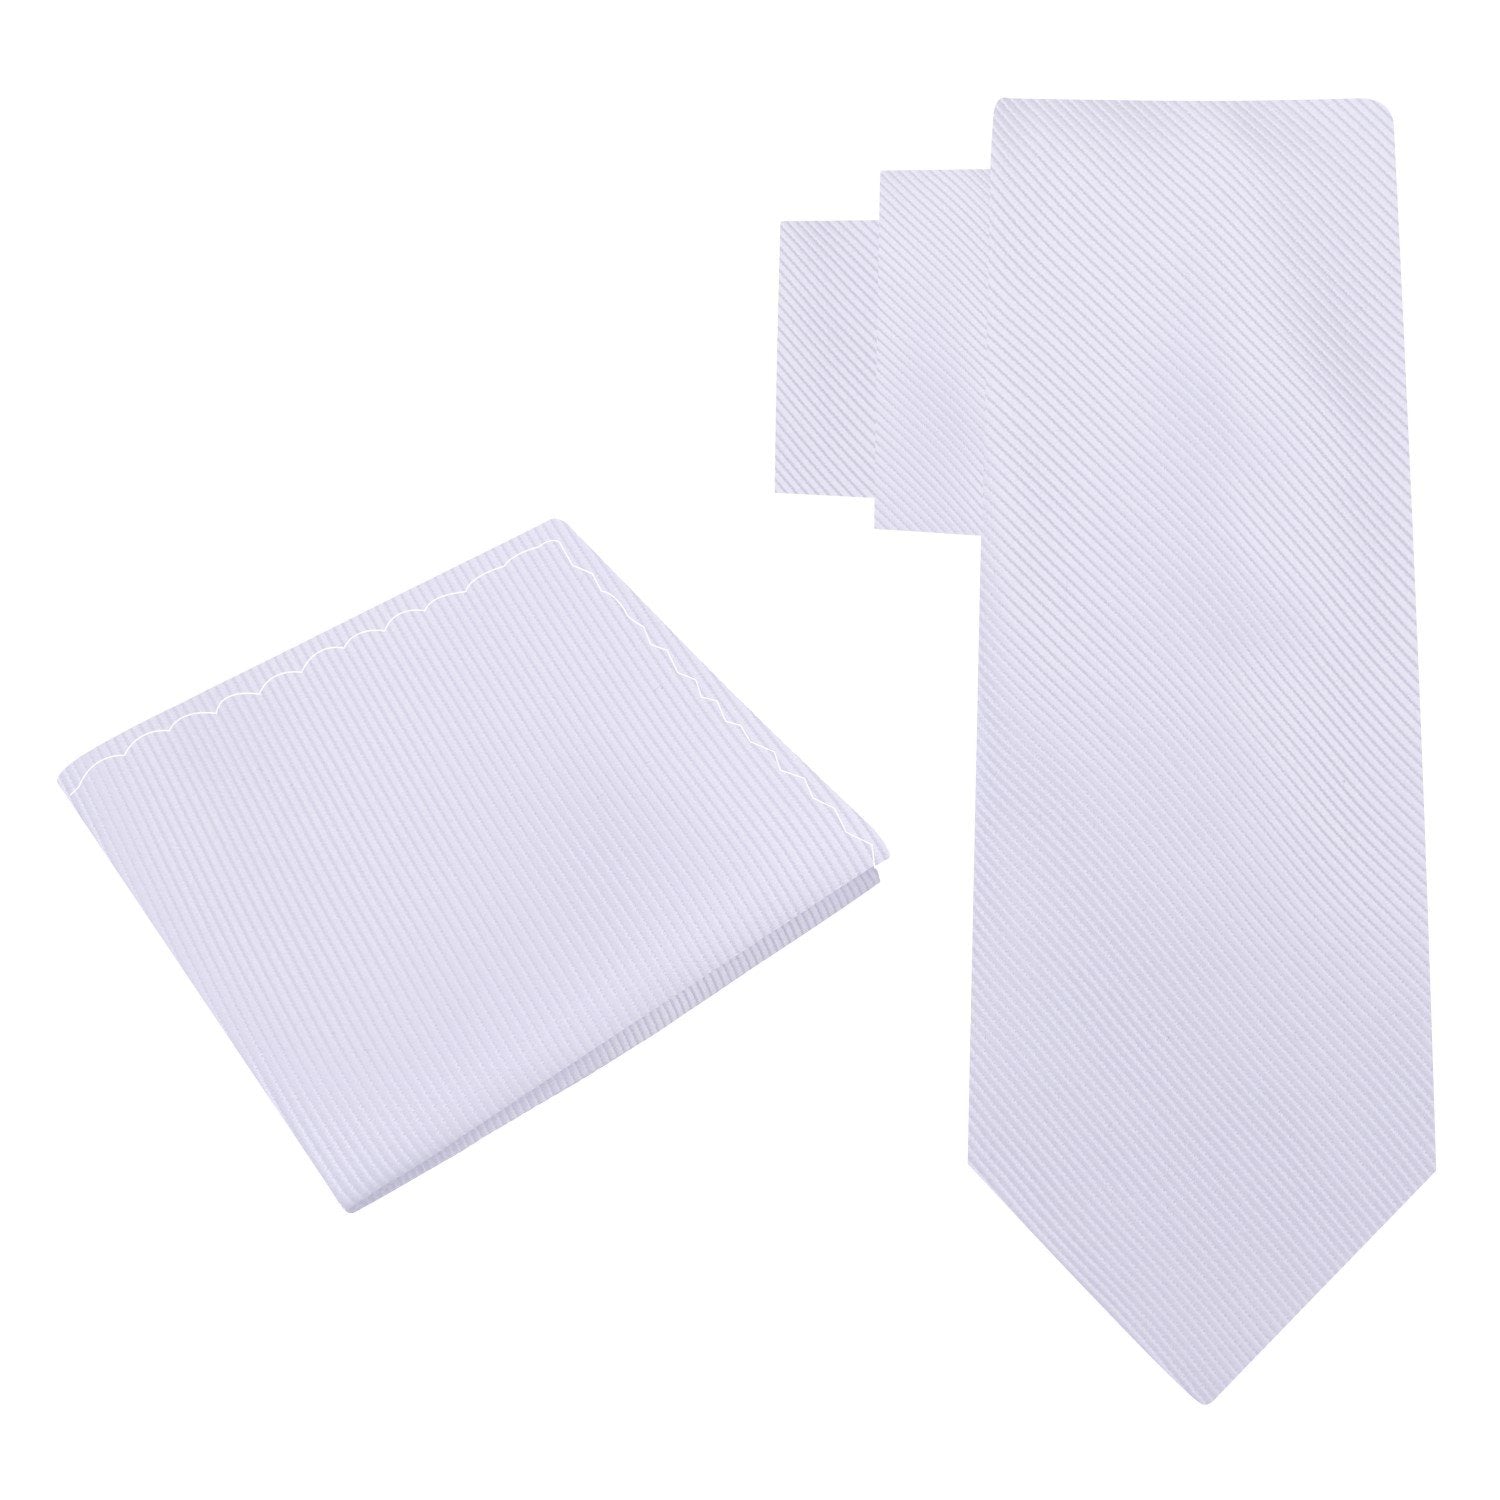 Alt View: A Solid White Colored Silk Necktie With Matching Pocket Square||White